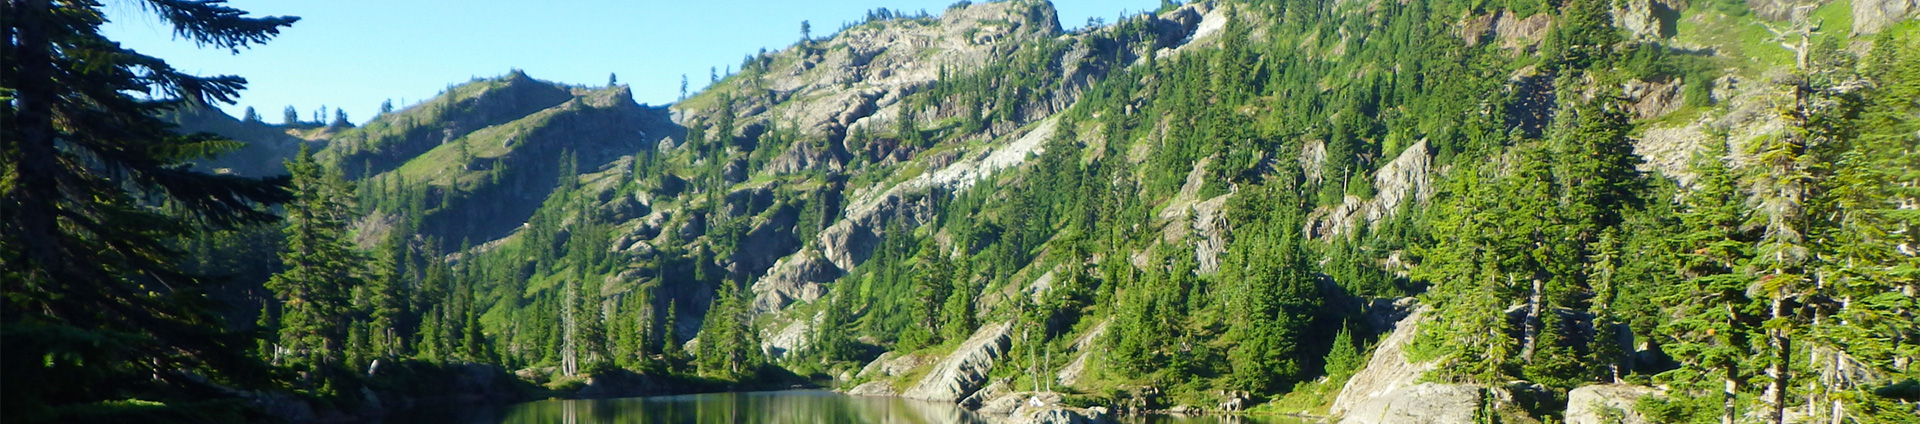 header image of Green Mountains and lake